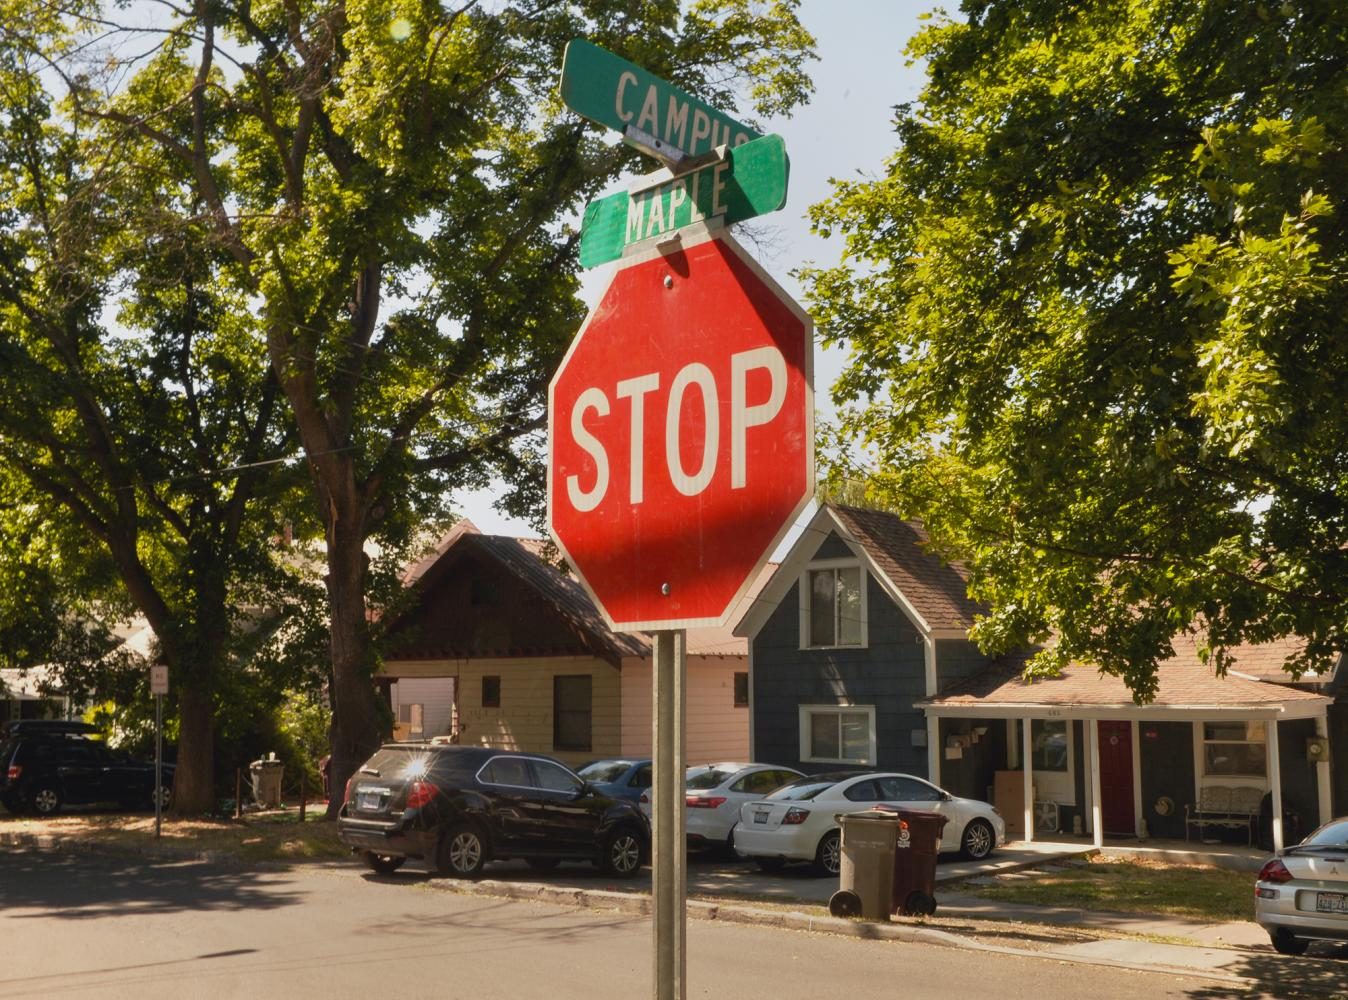 The stop sign on the corner of NE Campus and NE Maple Street was replaced last night after reported stolen.
